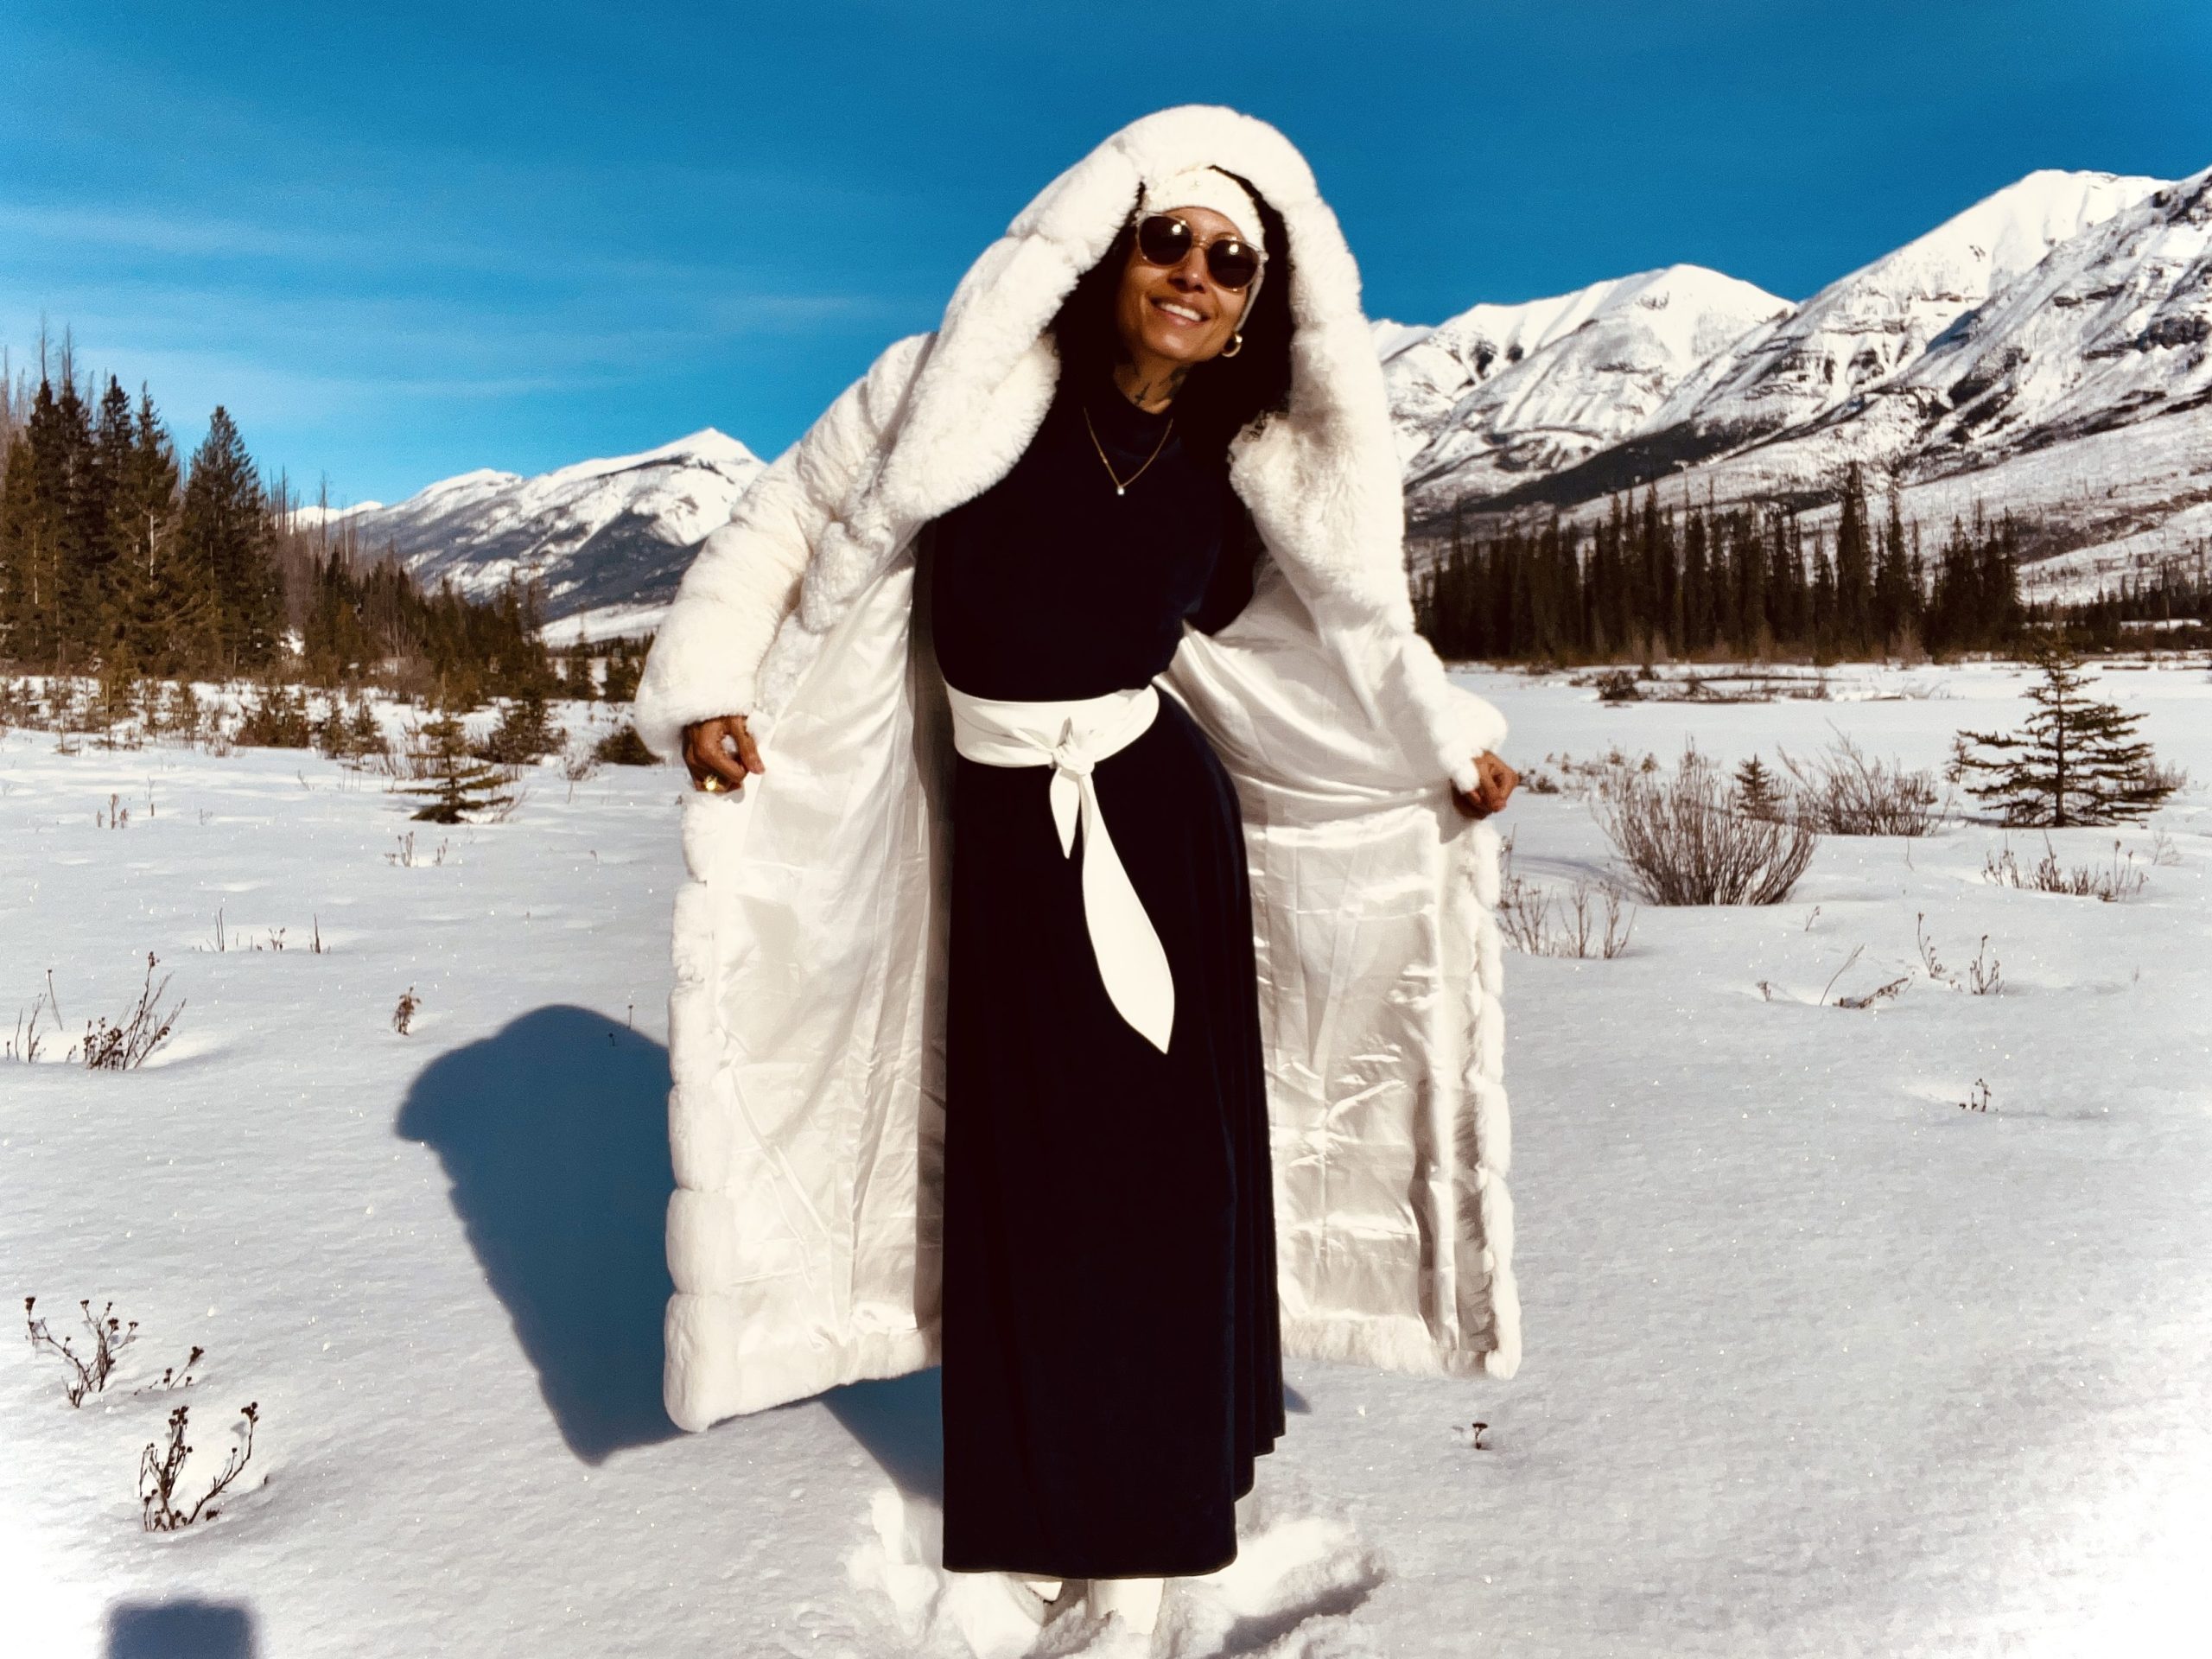 Elegant woman in white fur coat stands gracefully in snow, wearing dark blue vintage gown and white winter jacket.